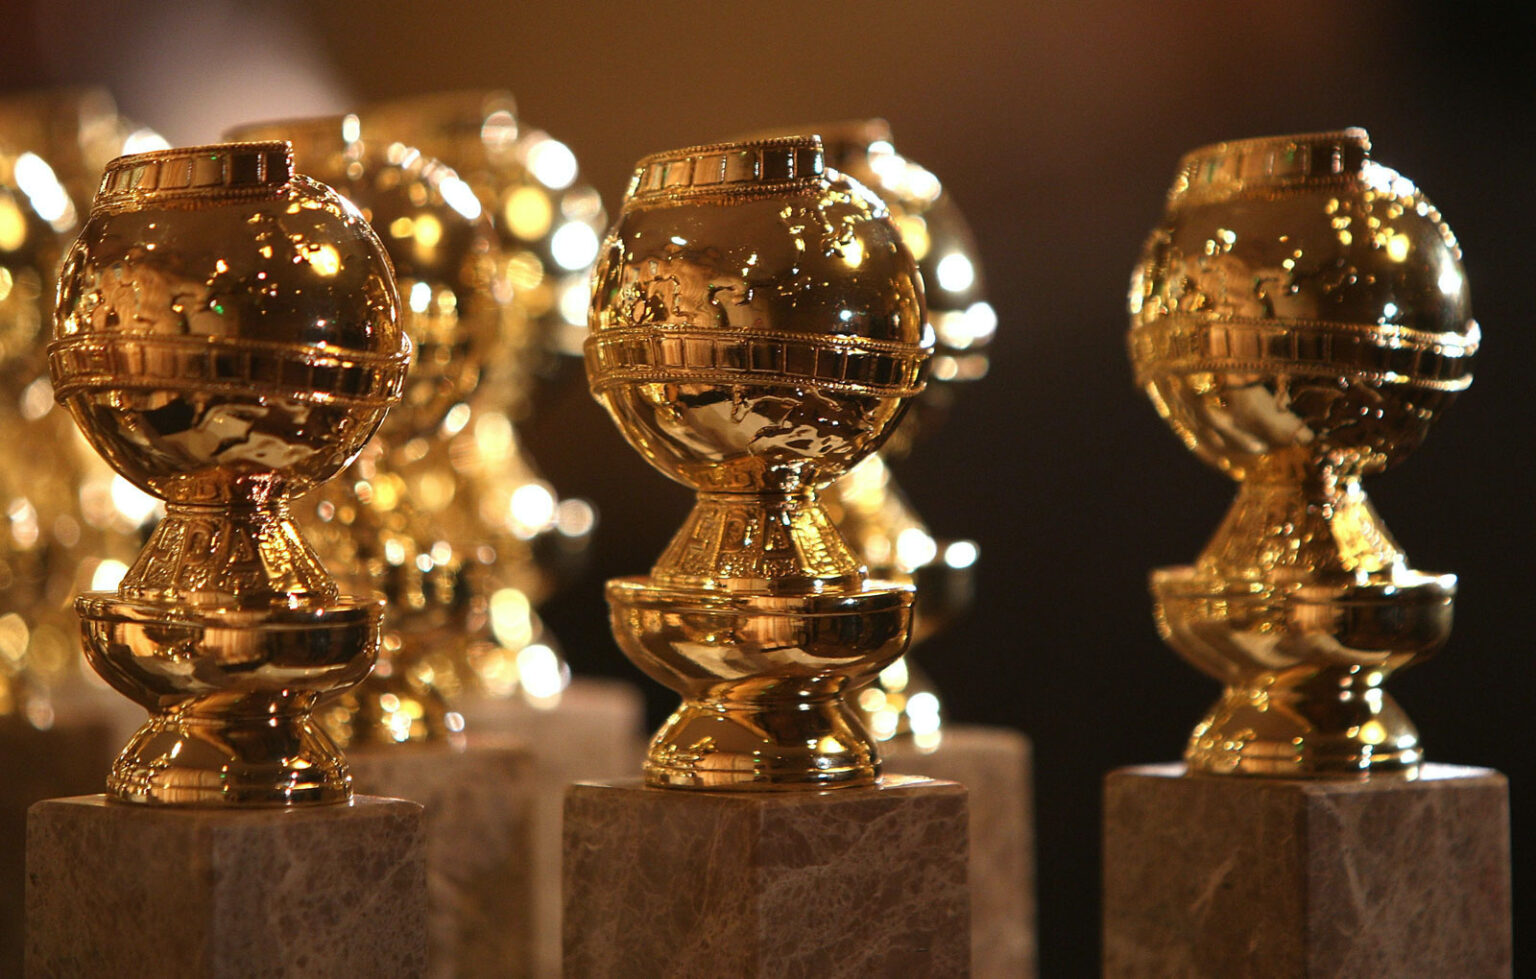 Just days before the 78th Golden Globe Awards, the organization a scathing new controversy has arisen. Here’s how the ceremony might be affected.